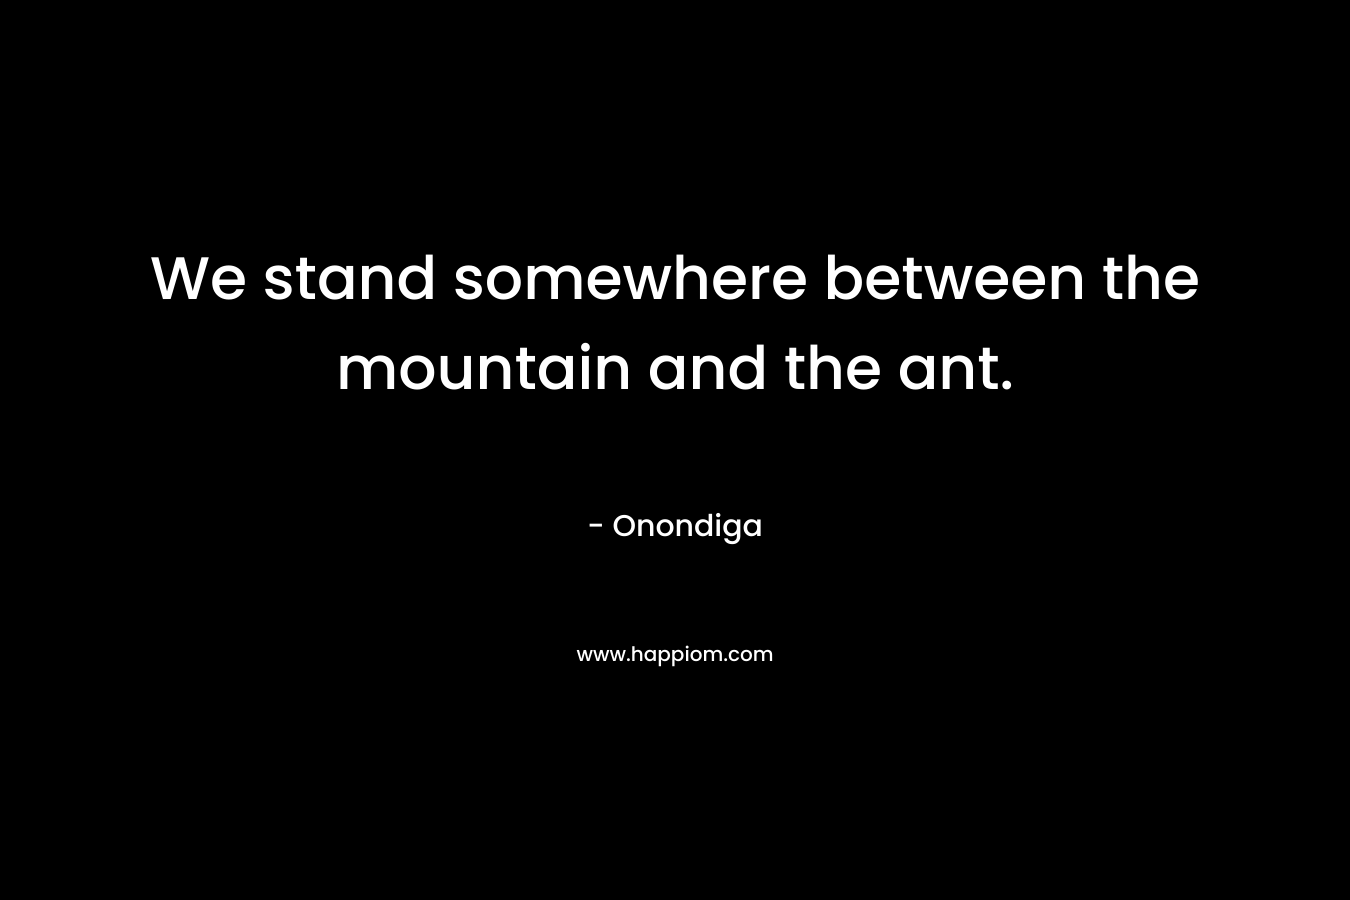 We stand somewhere between the mountain and the ant.